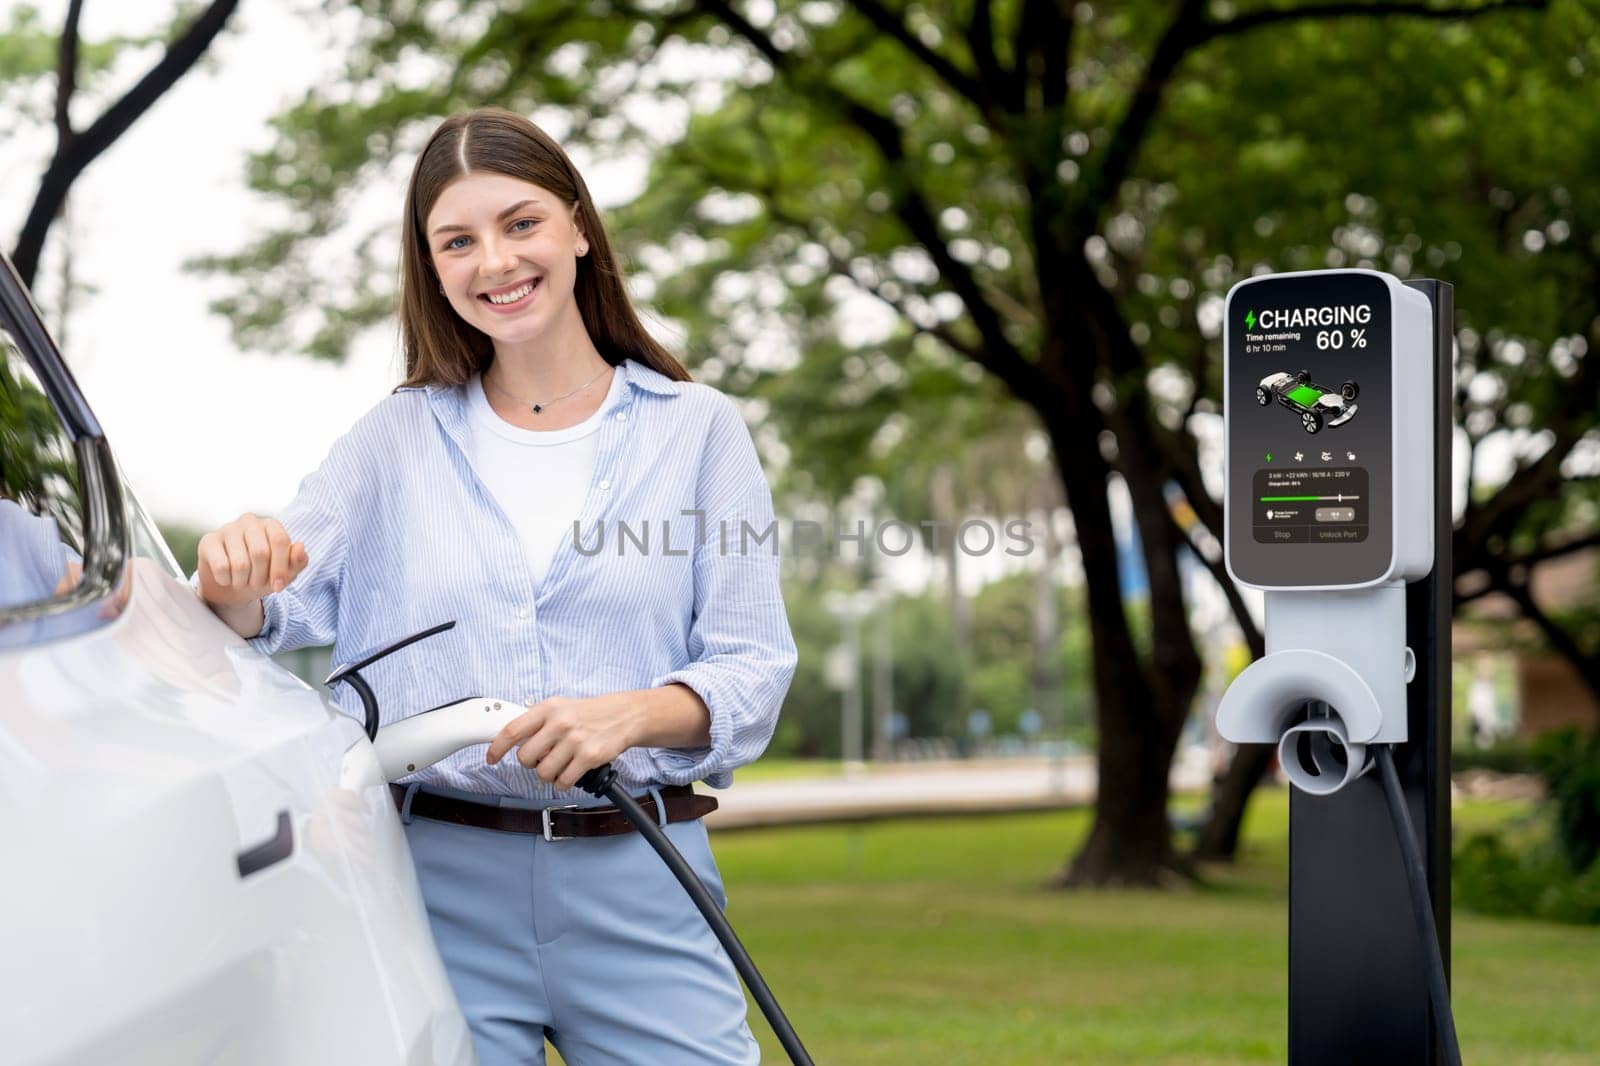 Young woman recharge EV electric vehicle's battery from EV charging station in outdoor green city park scenic. Eco friendly urban transport and commute with eco friendly EV car travel. Exalt